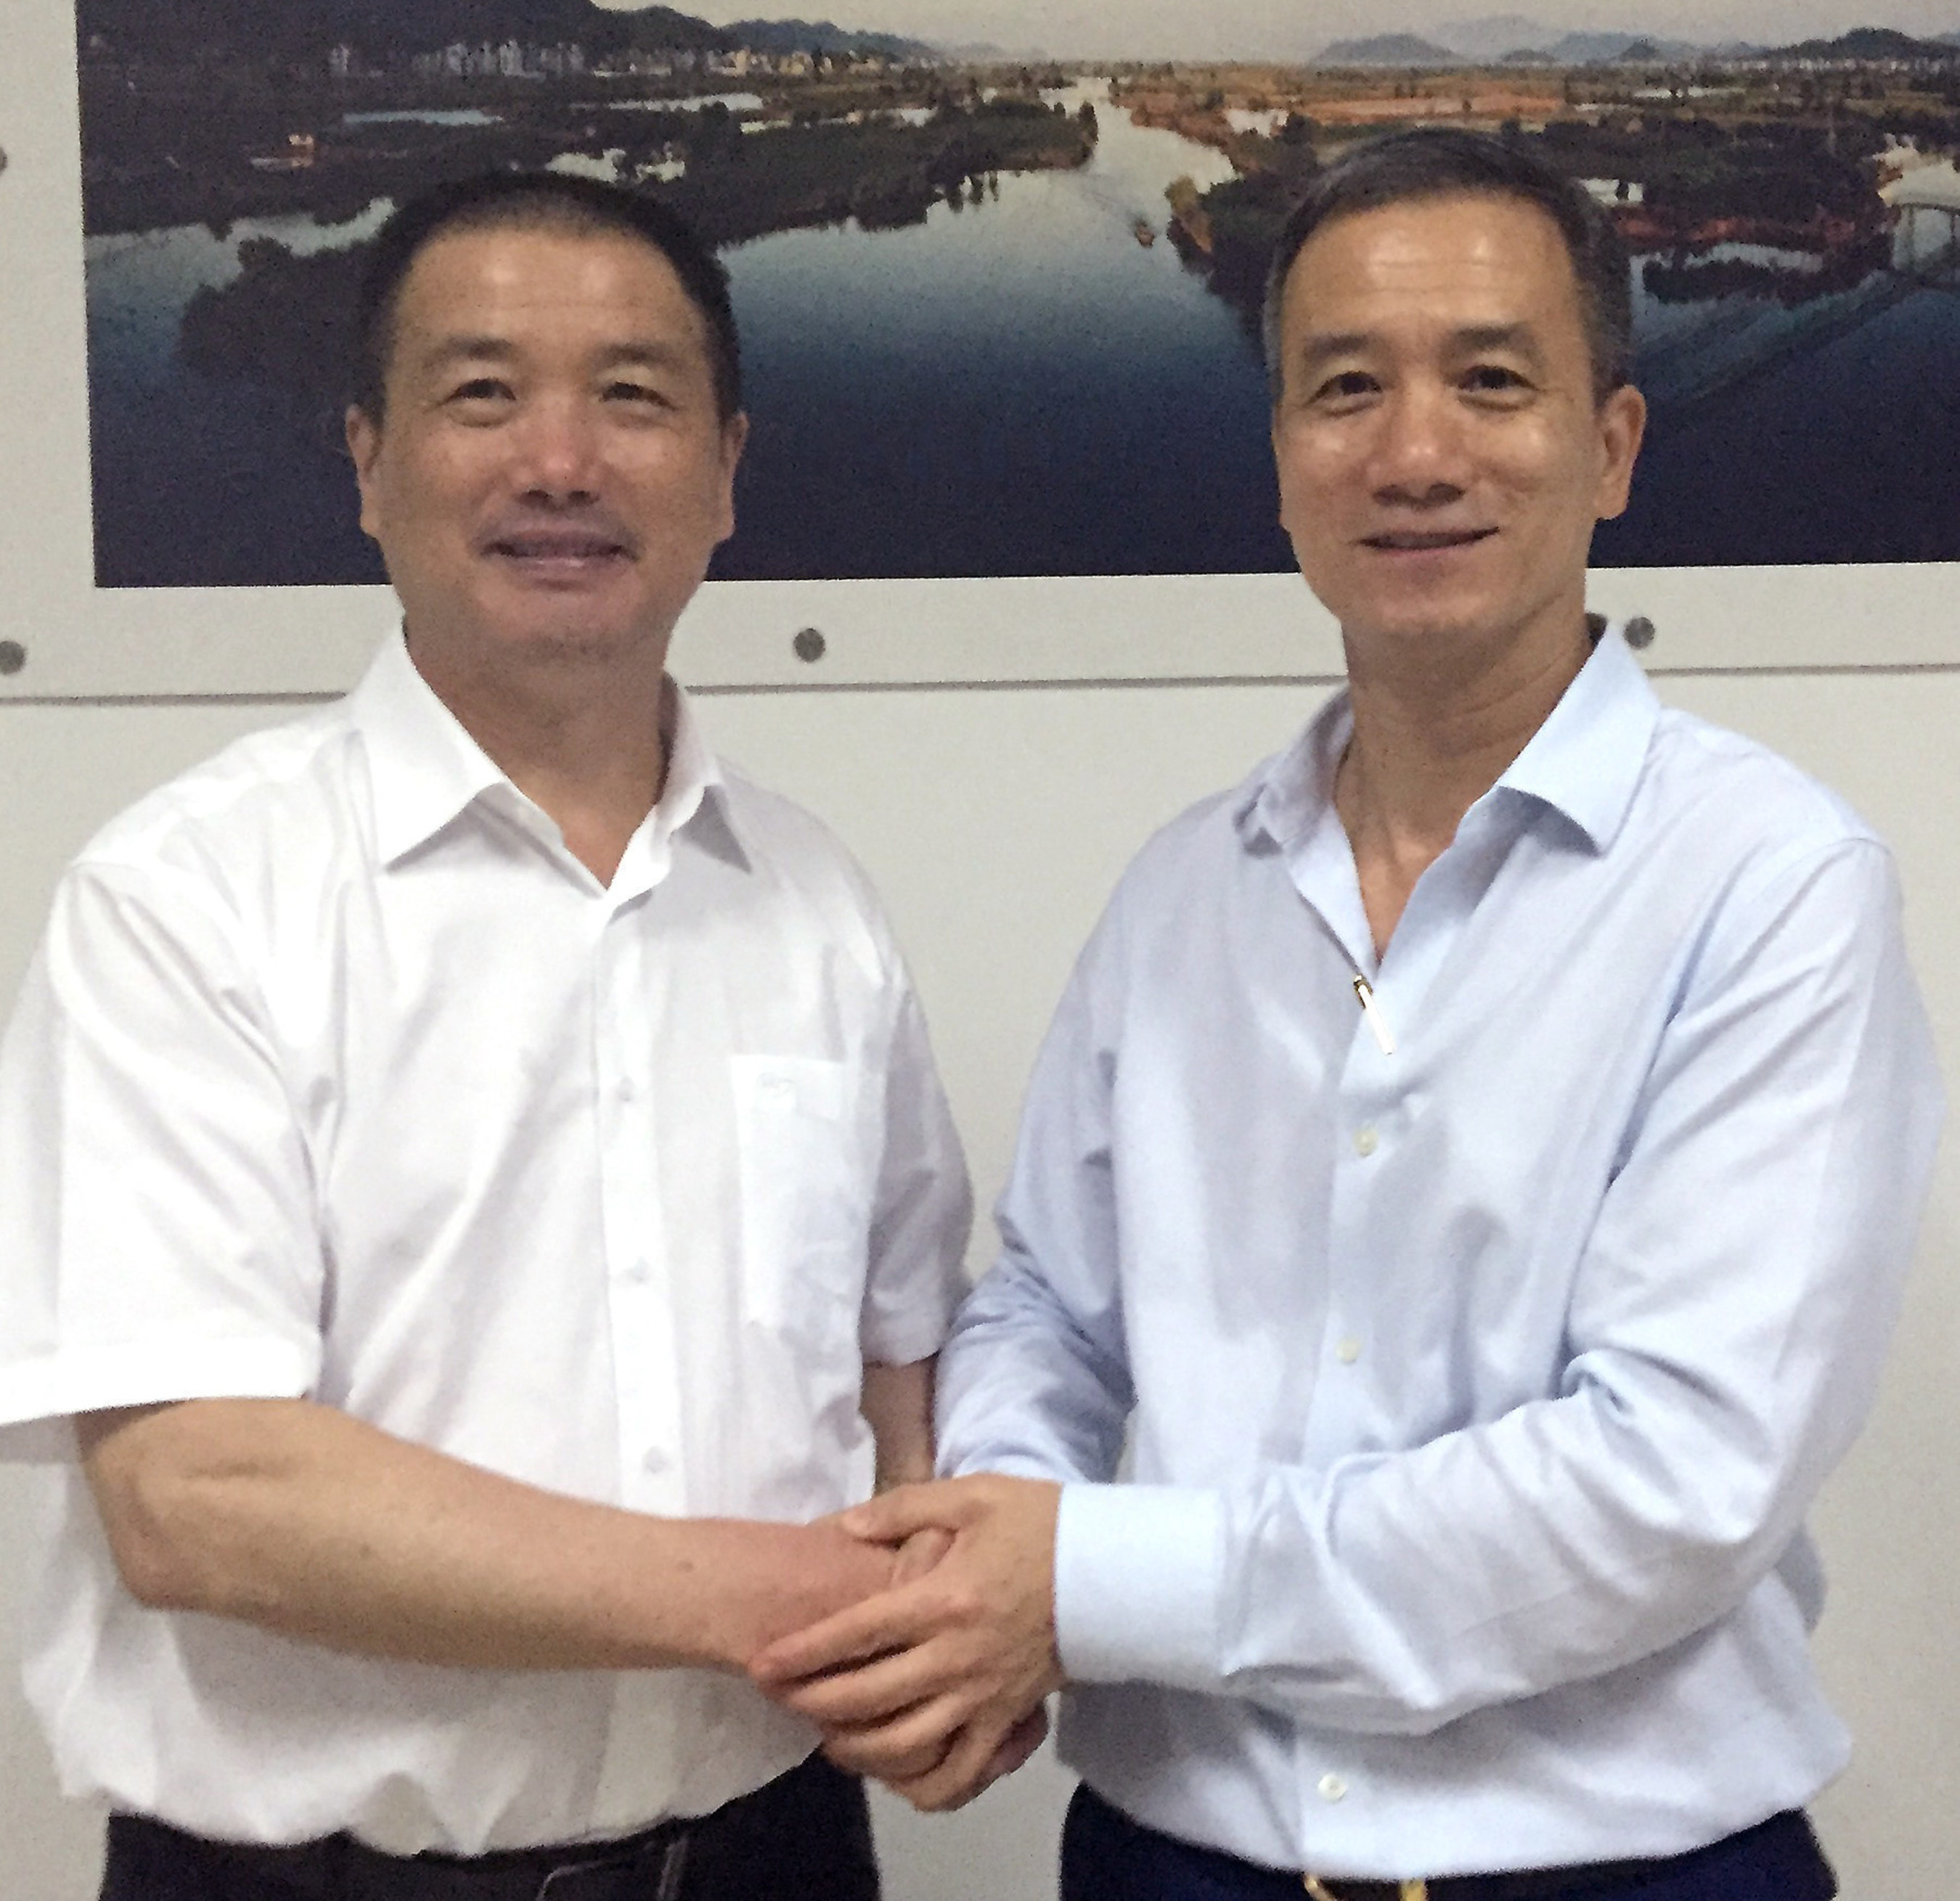 Lixiang Chen (left), Chairman of Zhejiang VIE Science & Technology CO., Ltd., and VIE Group CO., Ltd., shaking hands with KwokYin Chan (right), CEO of Protean Electric, after signing the investment agreement and JV contract at Zhejiang VIE Science & Technology Co. Ltd.